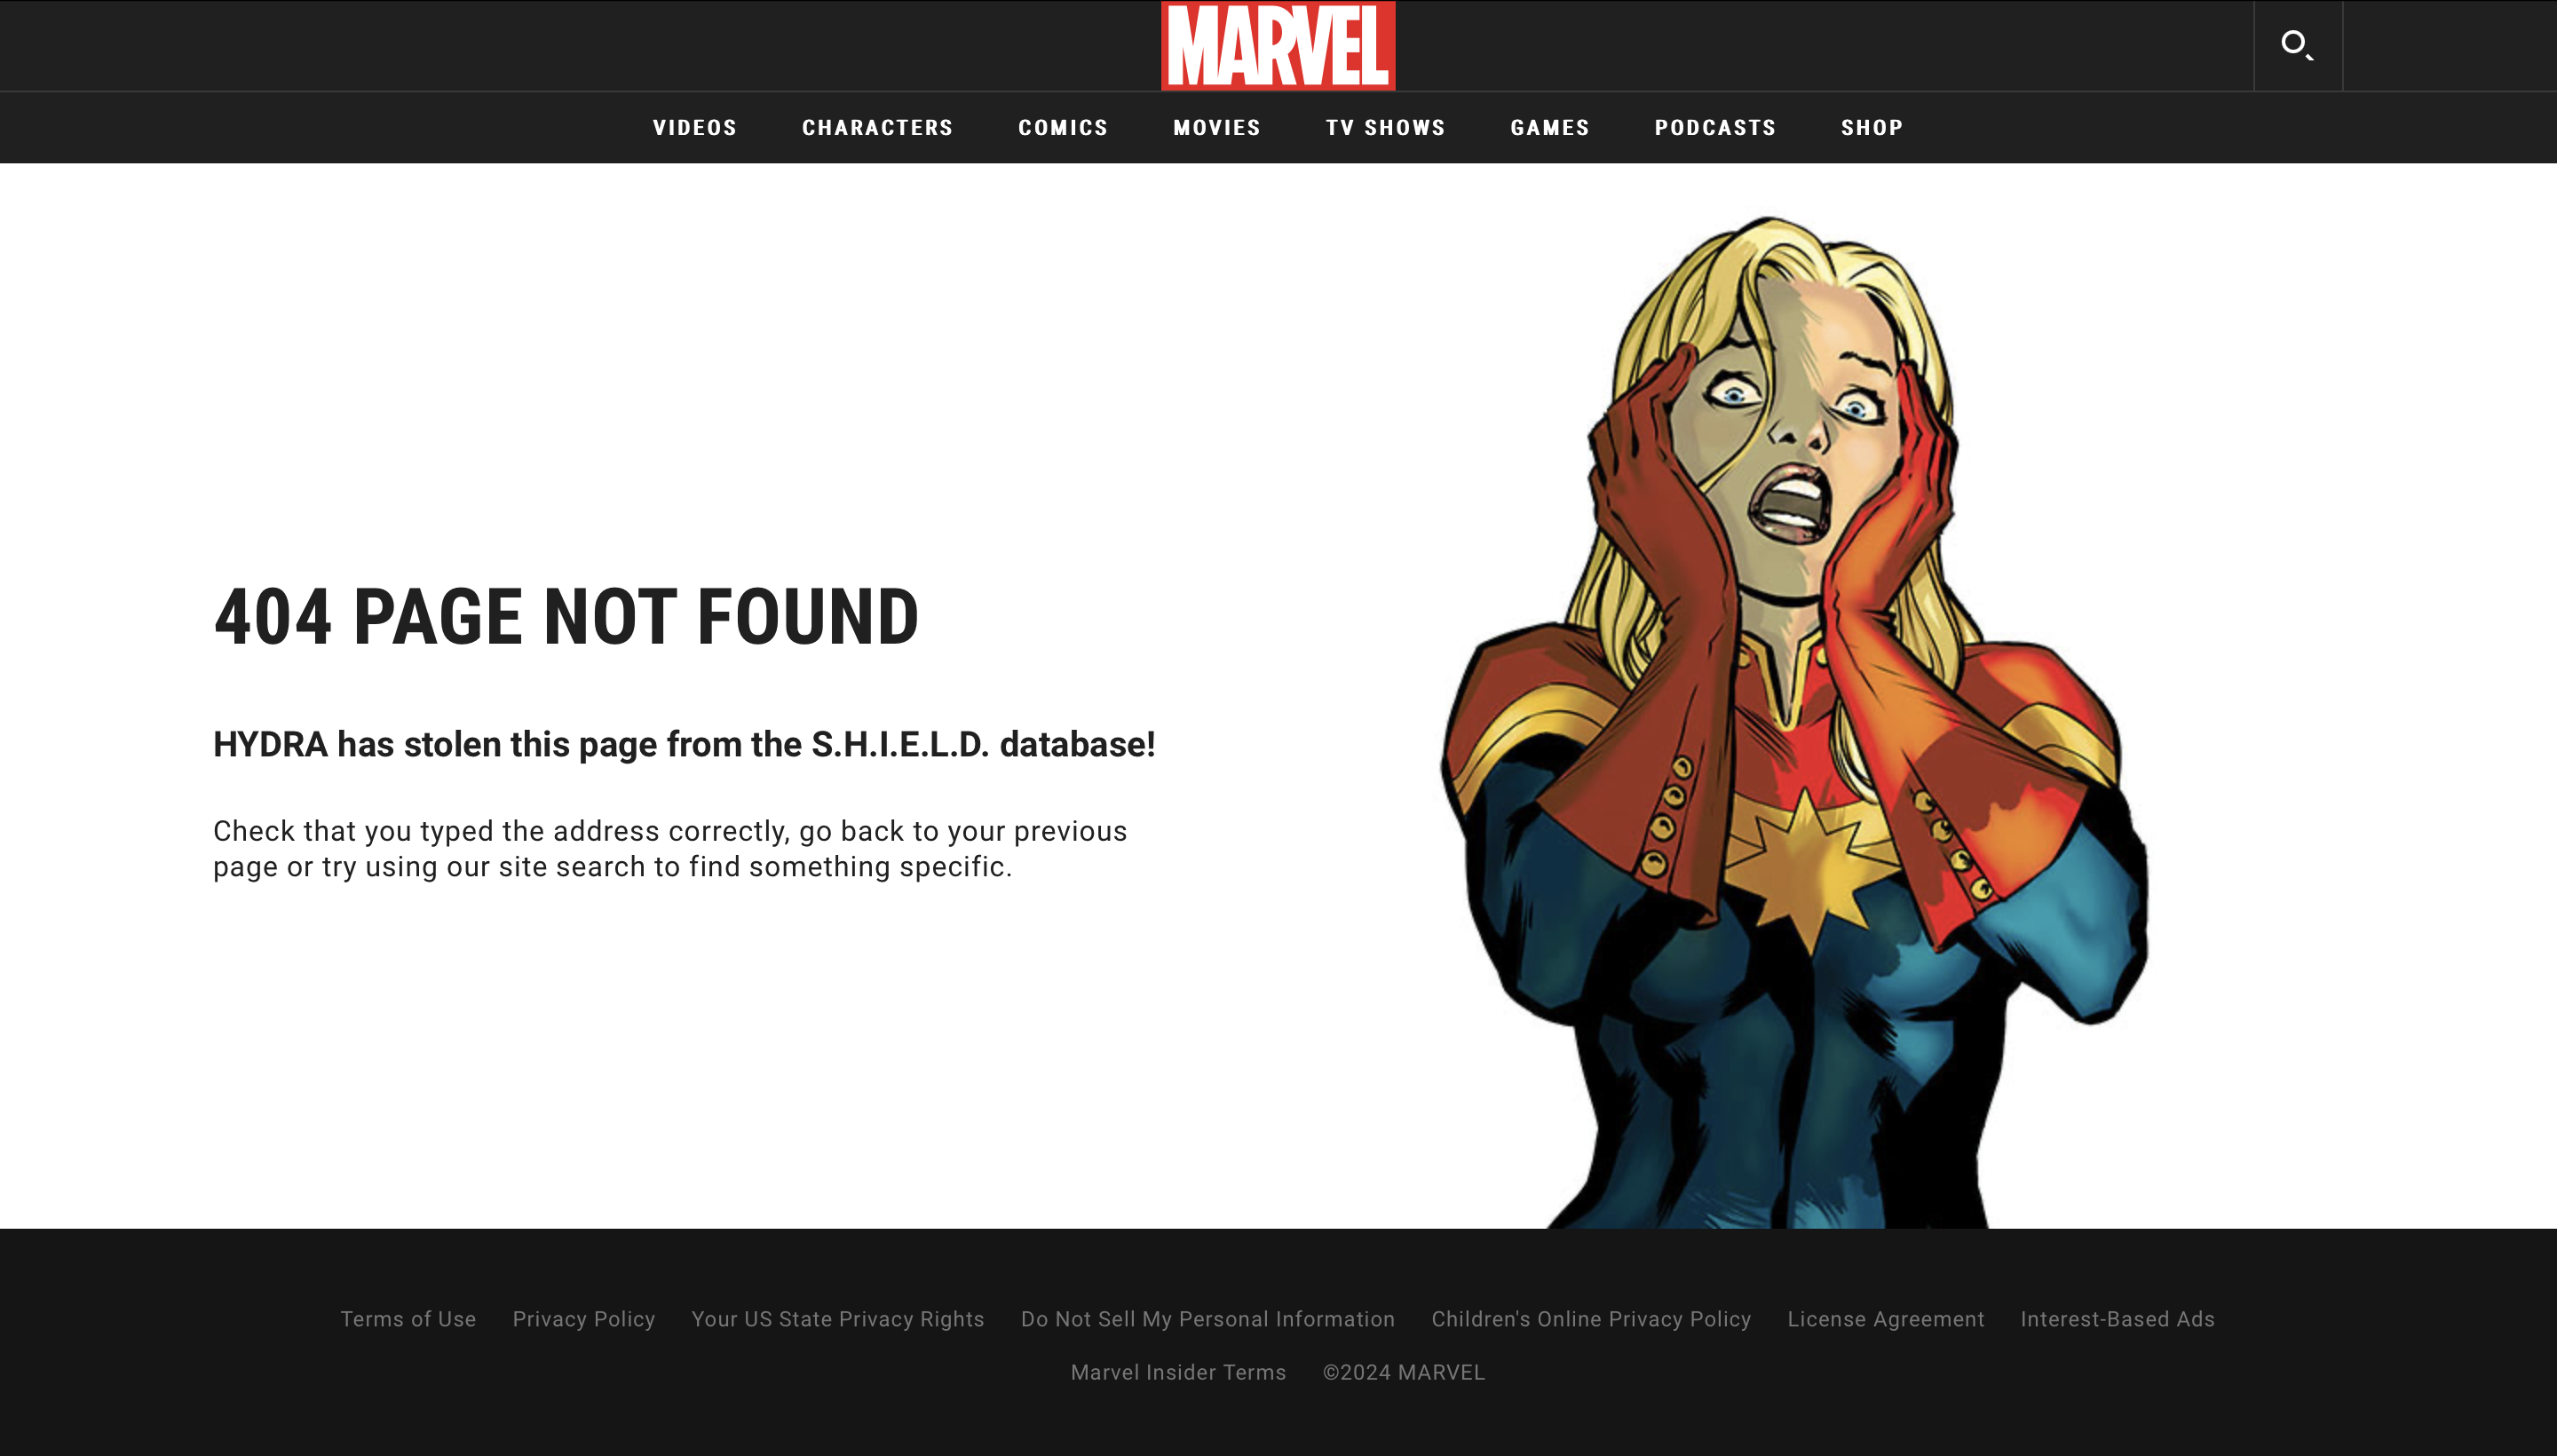 Marvel 404 page